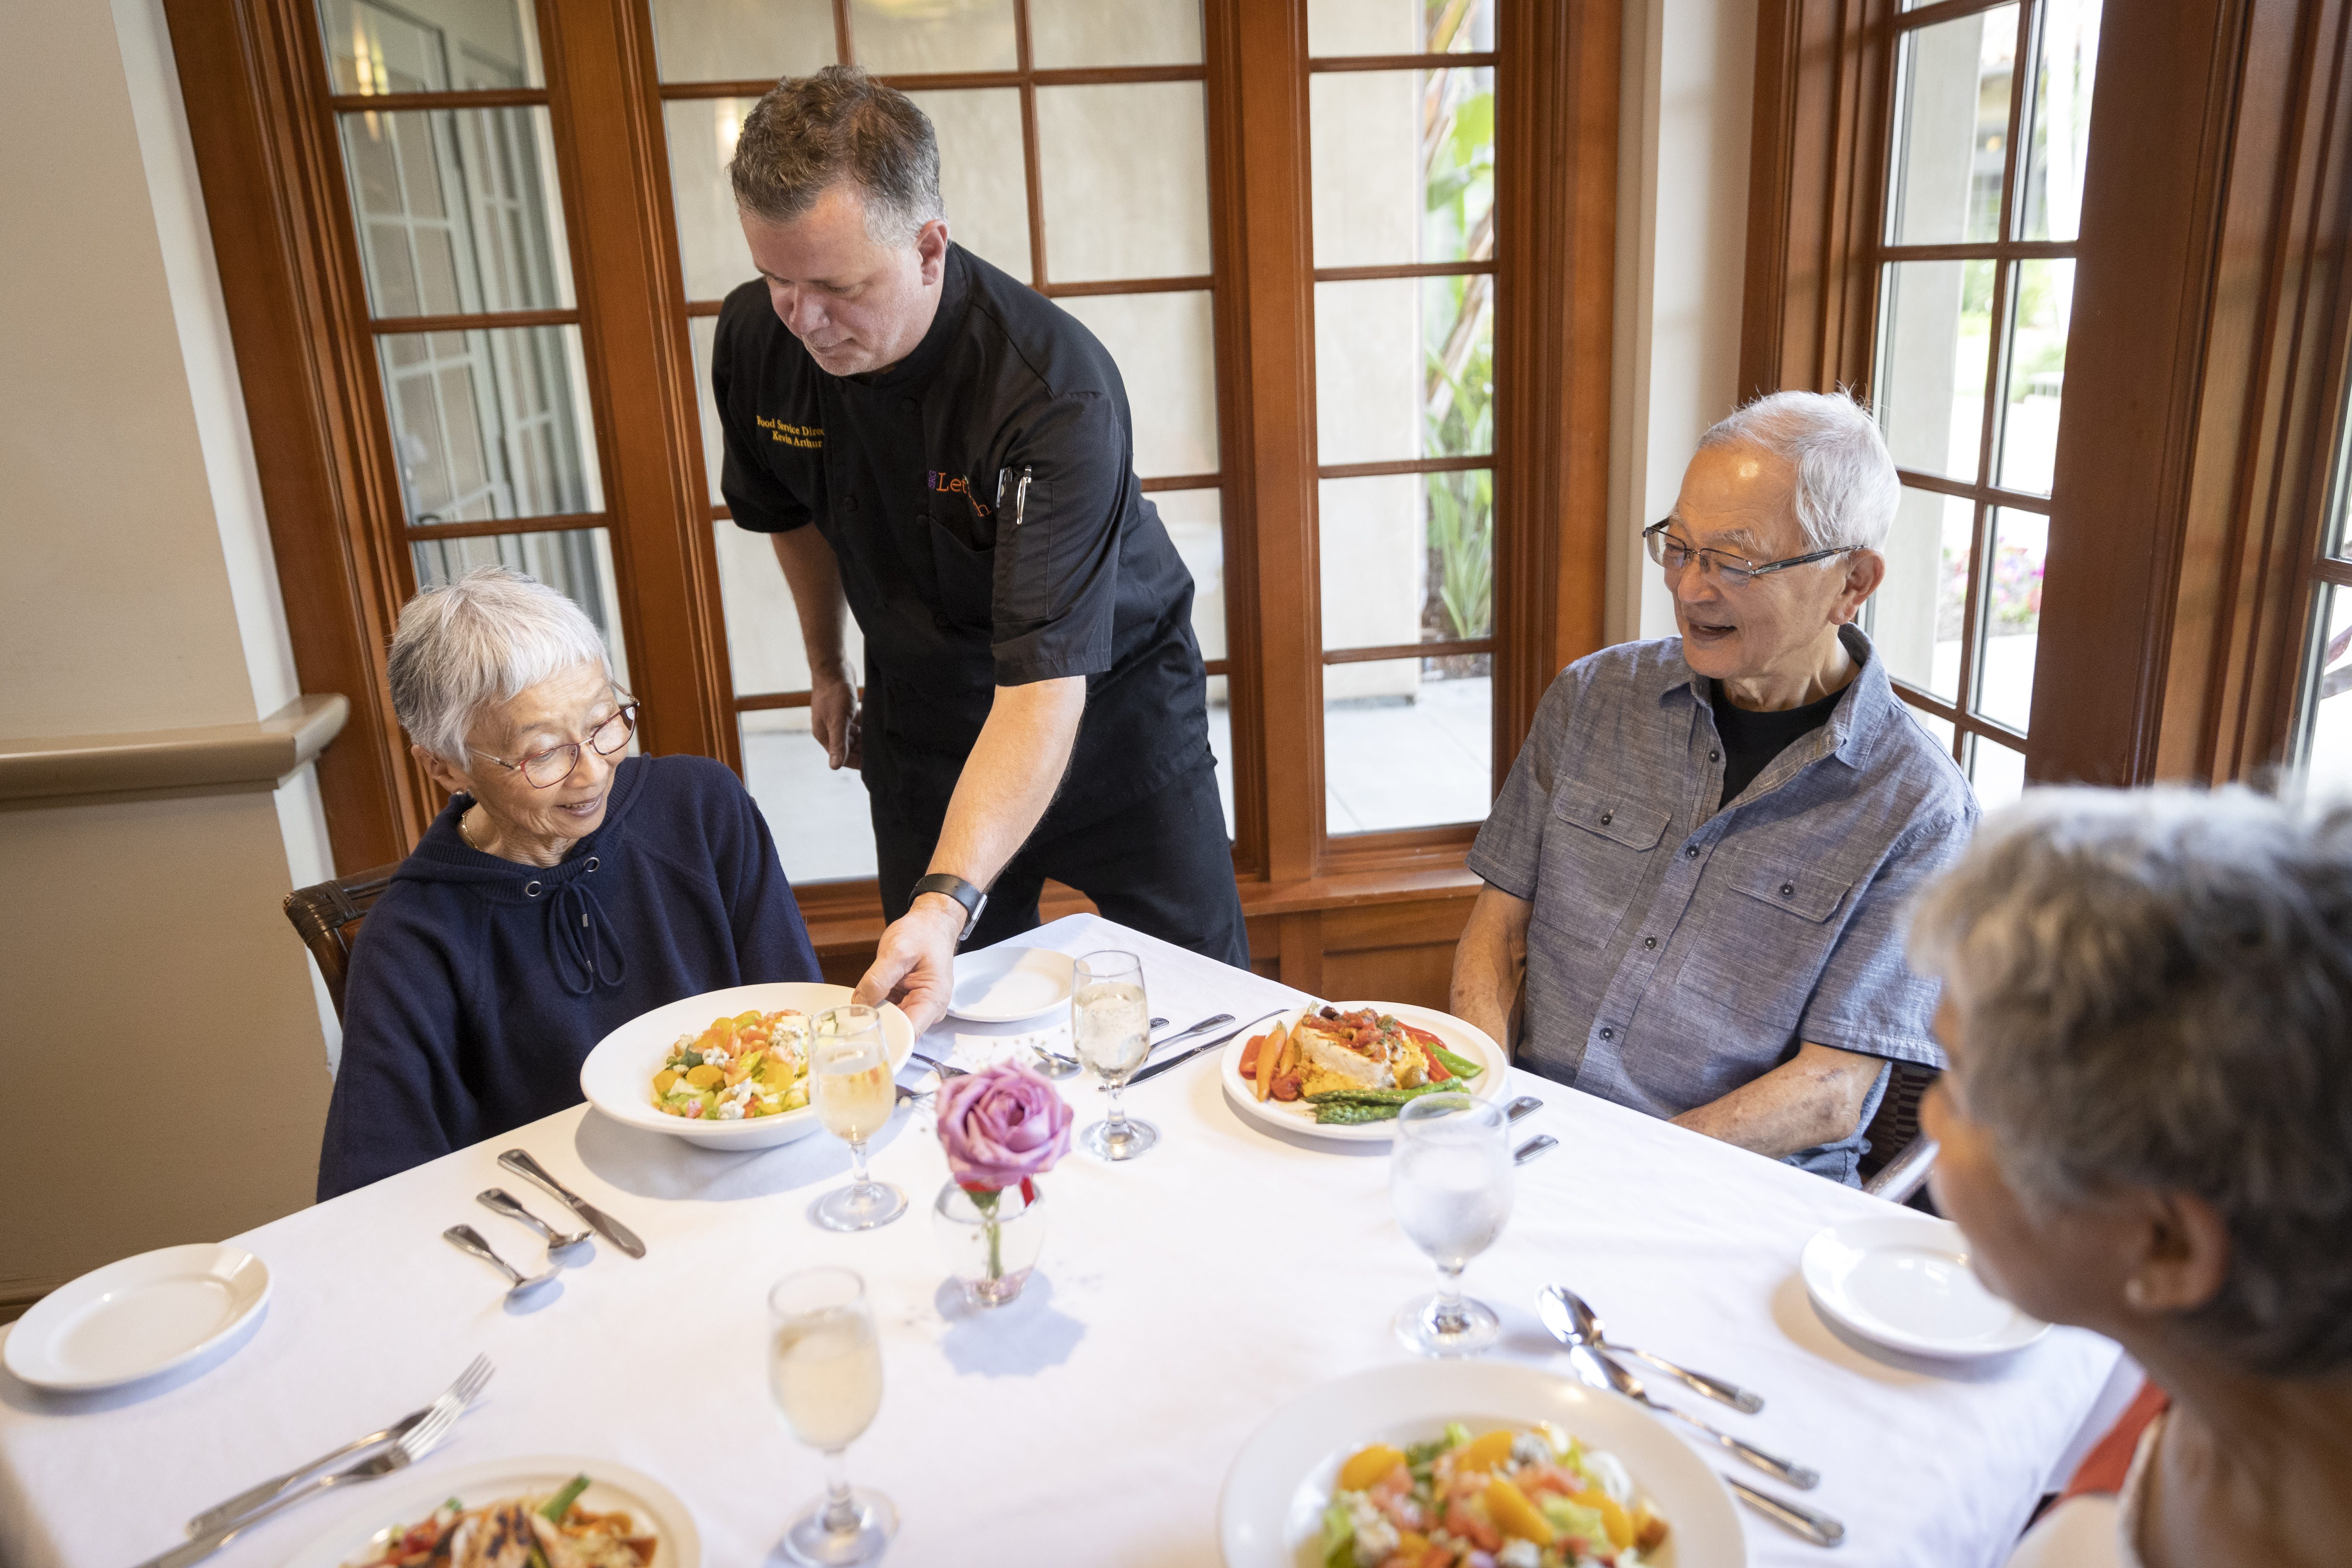 A waiter serving a meal to an elderly couple at a restaurant, ensuring their dining experience is pleasant and enjoyable.